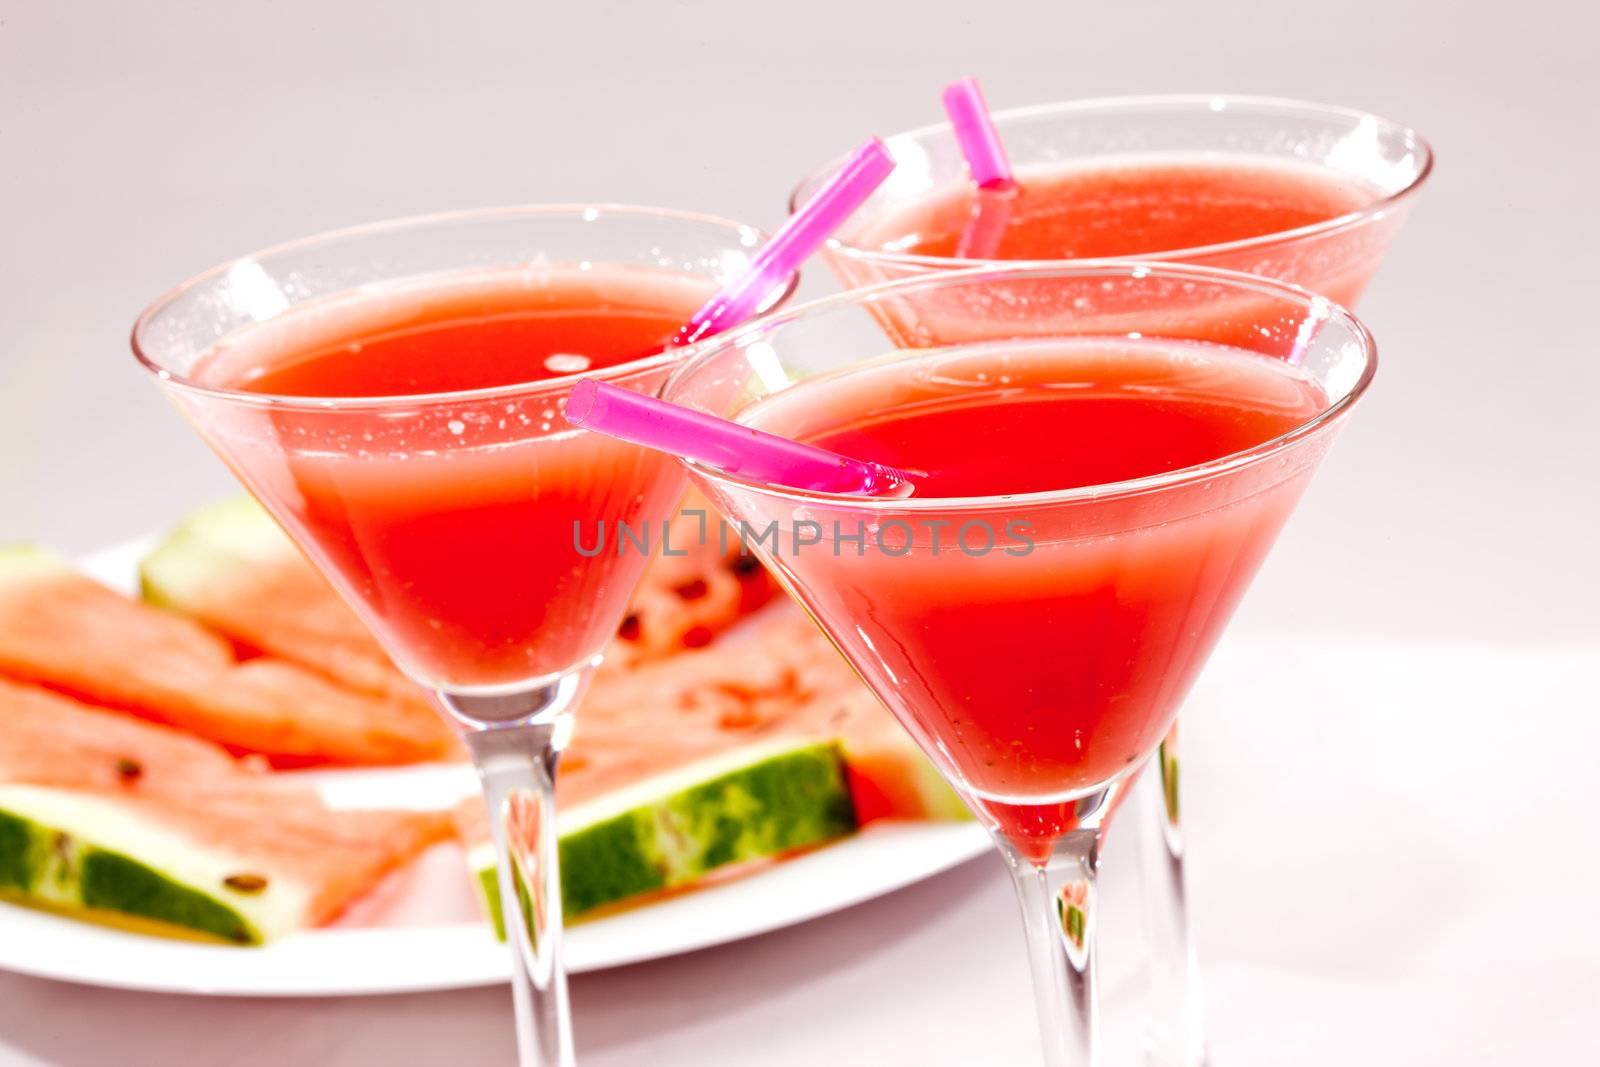 food series: some glasses with water melon cocktail